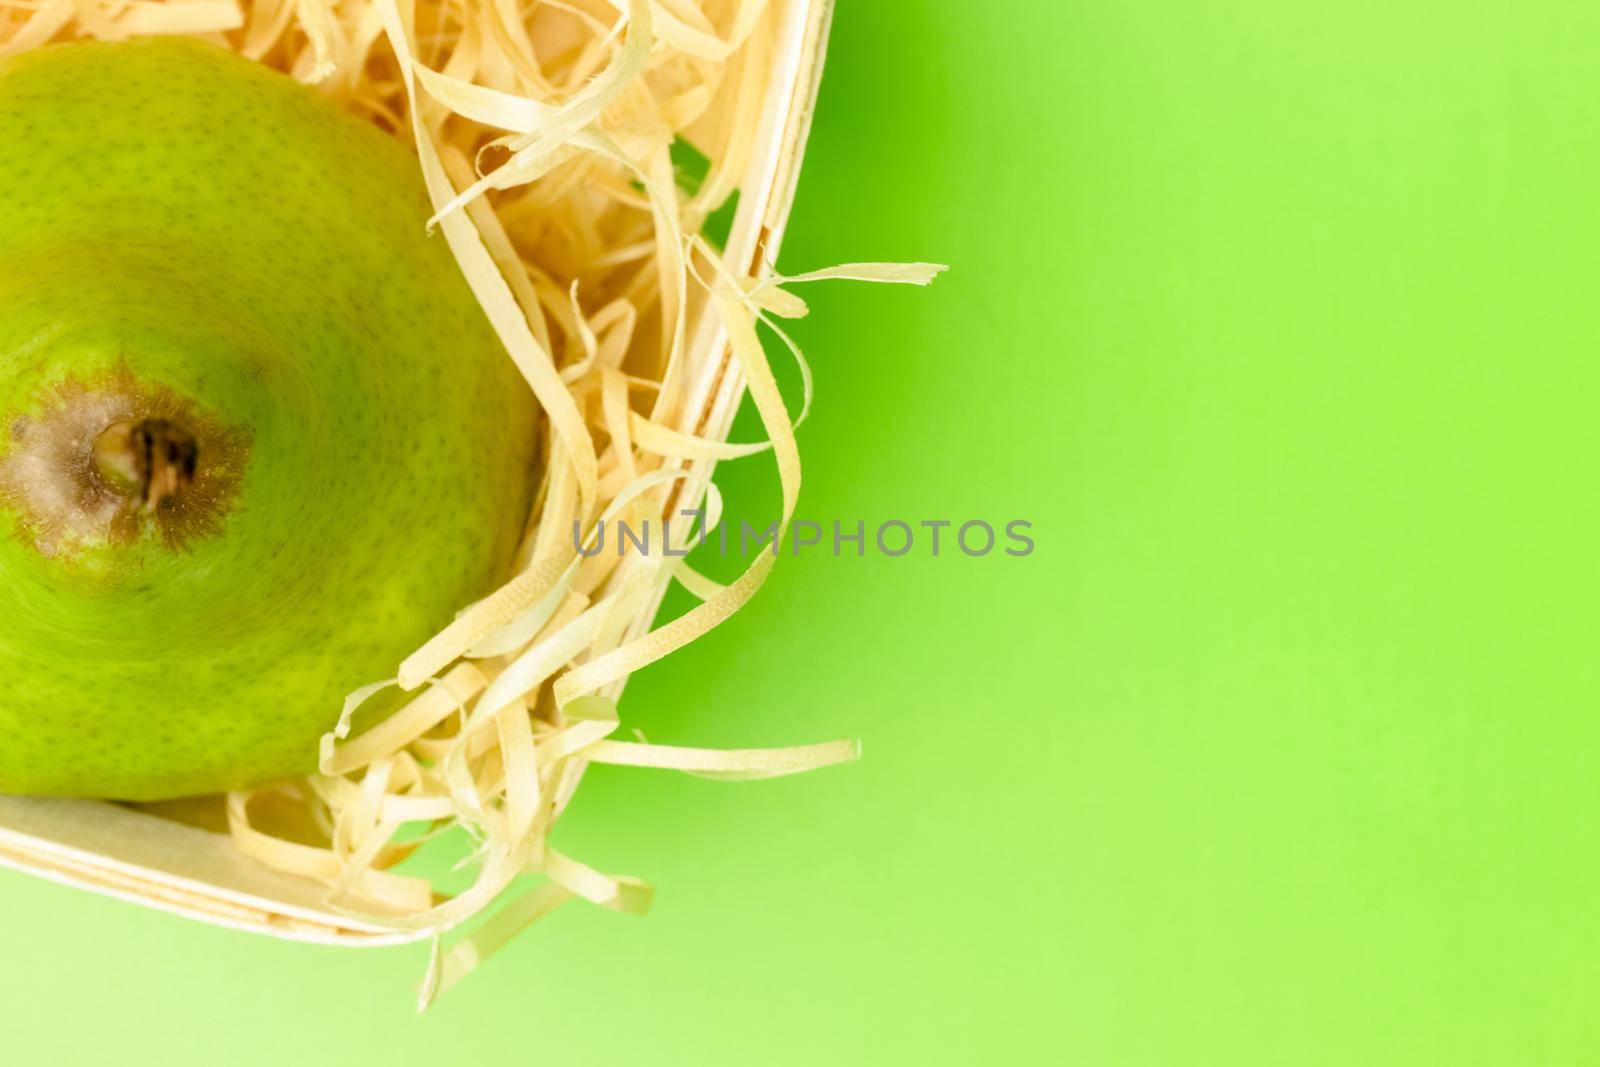 pear basket on a green background close-up by roman112007